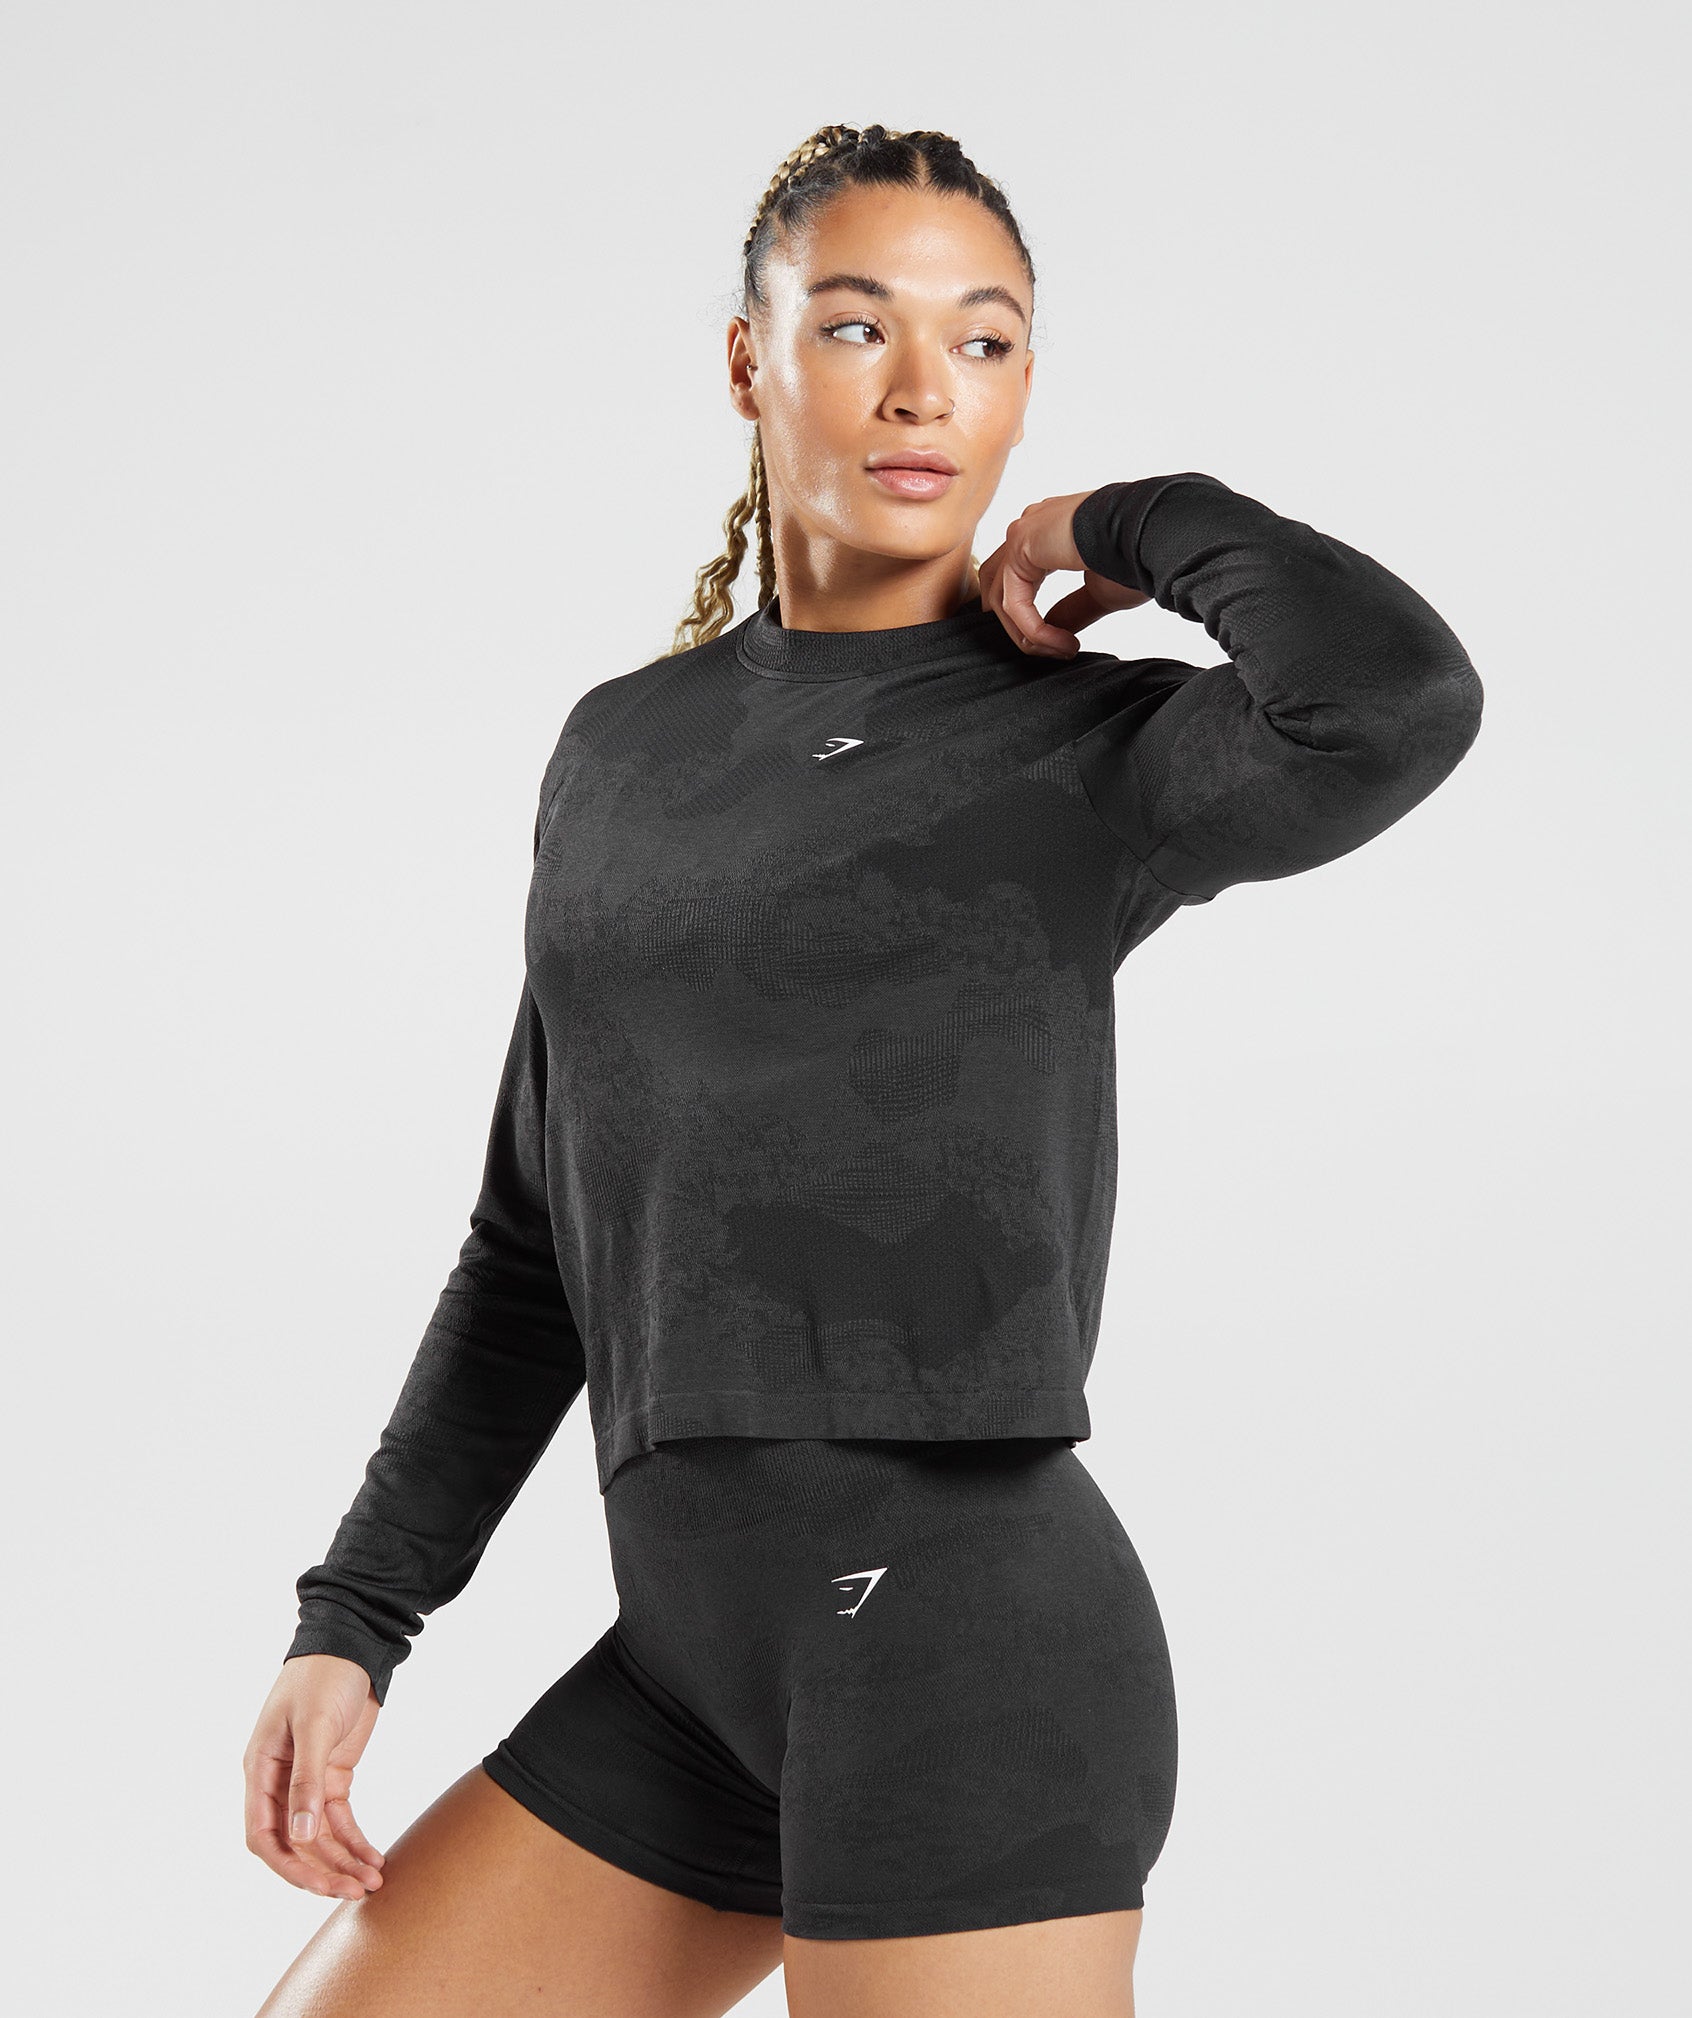 Adapt Camo Seamless Long Sleeve Top in  Black - view 3